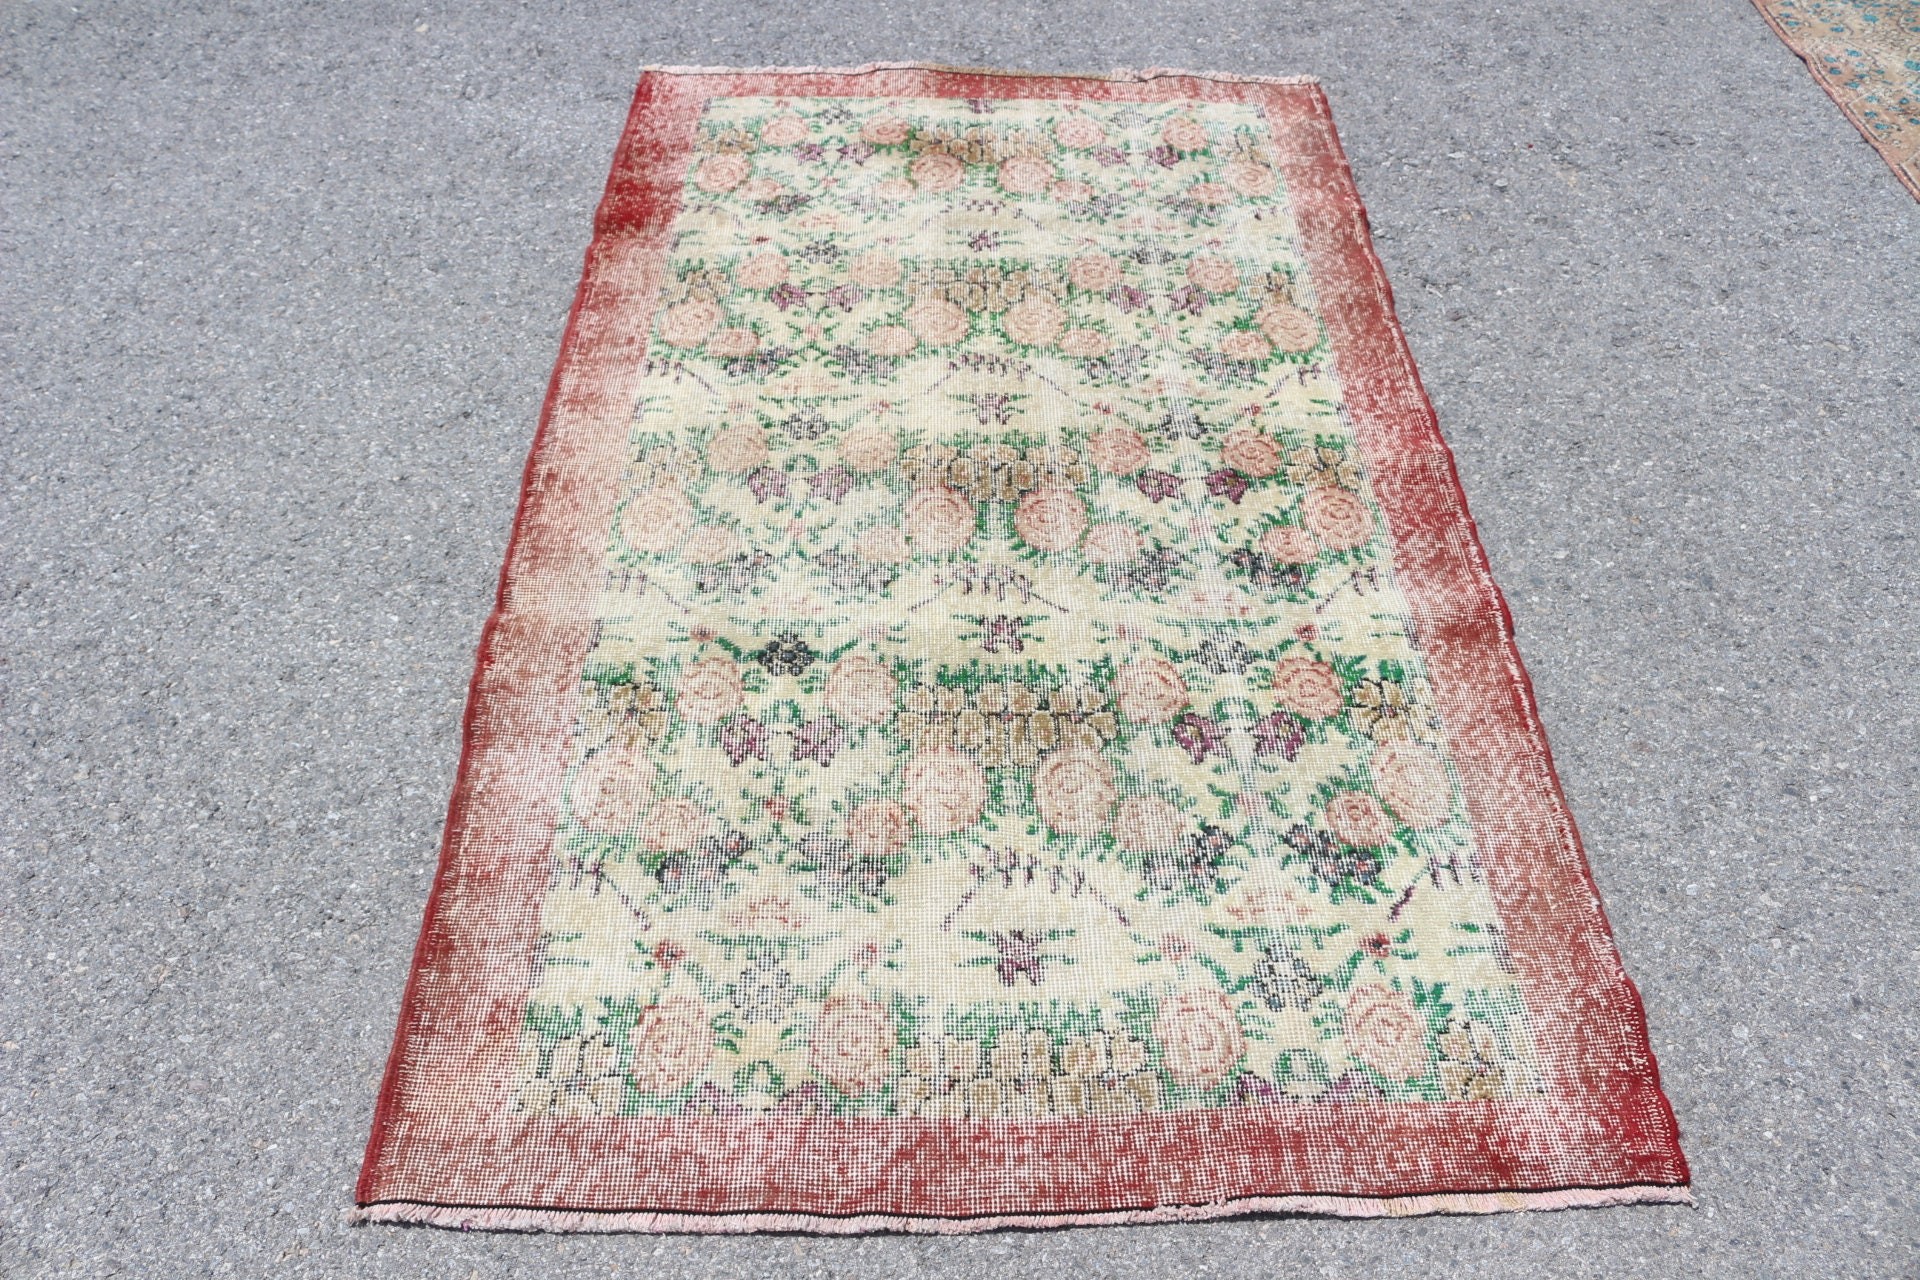 Cool Rug, Antique Rug, Floor Rug, Kitchen Rugs, Vintage Rug, Rugs for Living Room, Red Anatolian Rugs, Turkish Rugs, 3.8x6.6 ft Area Rug